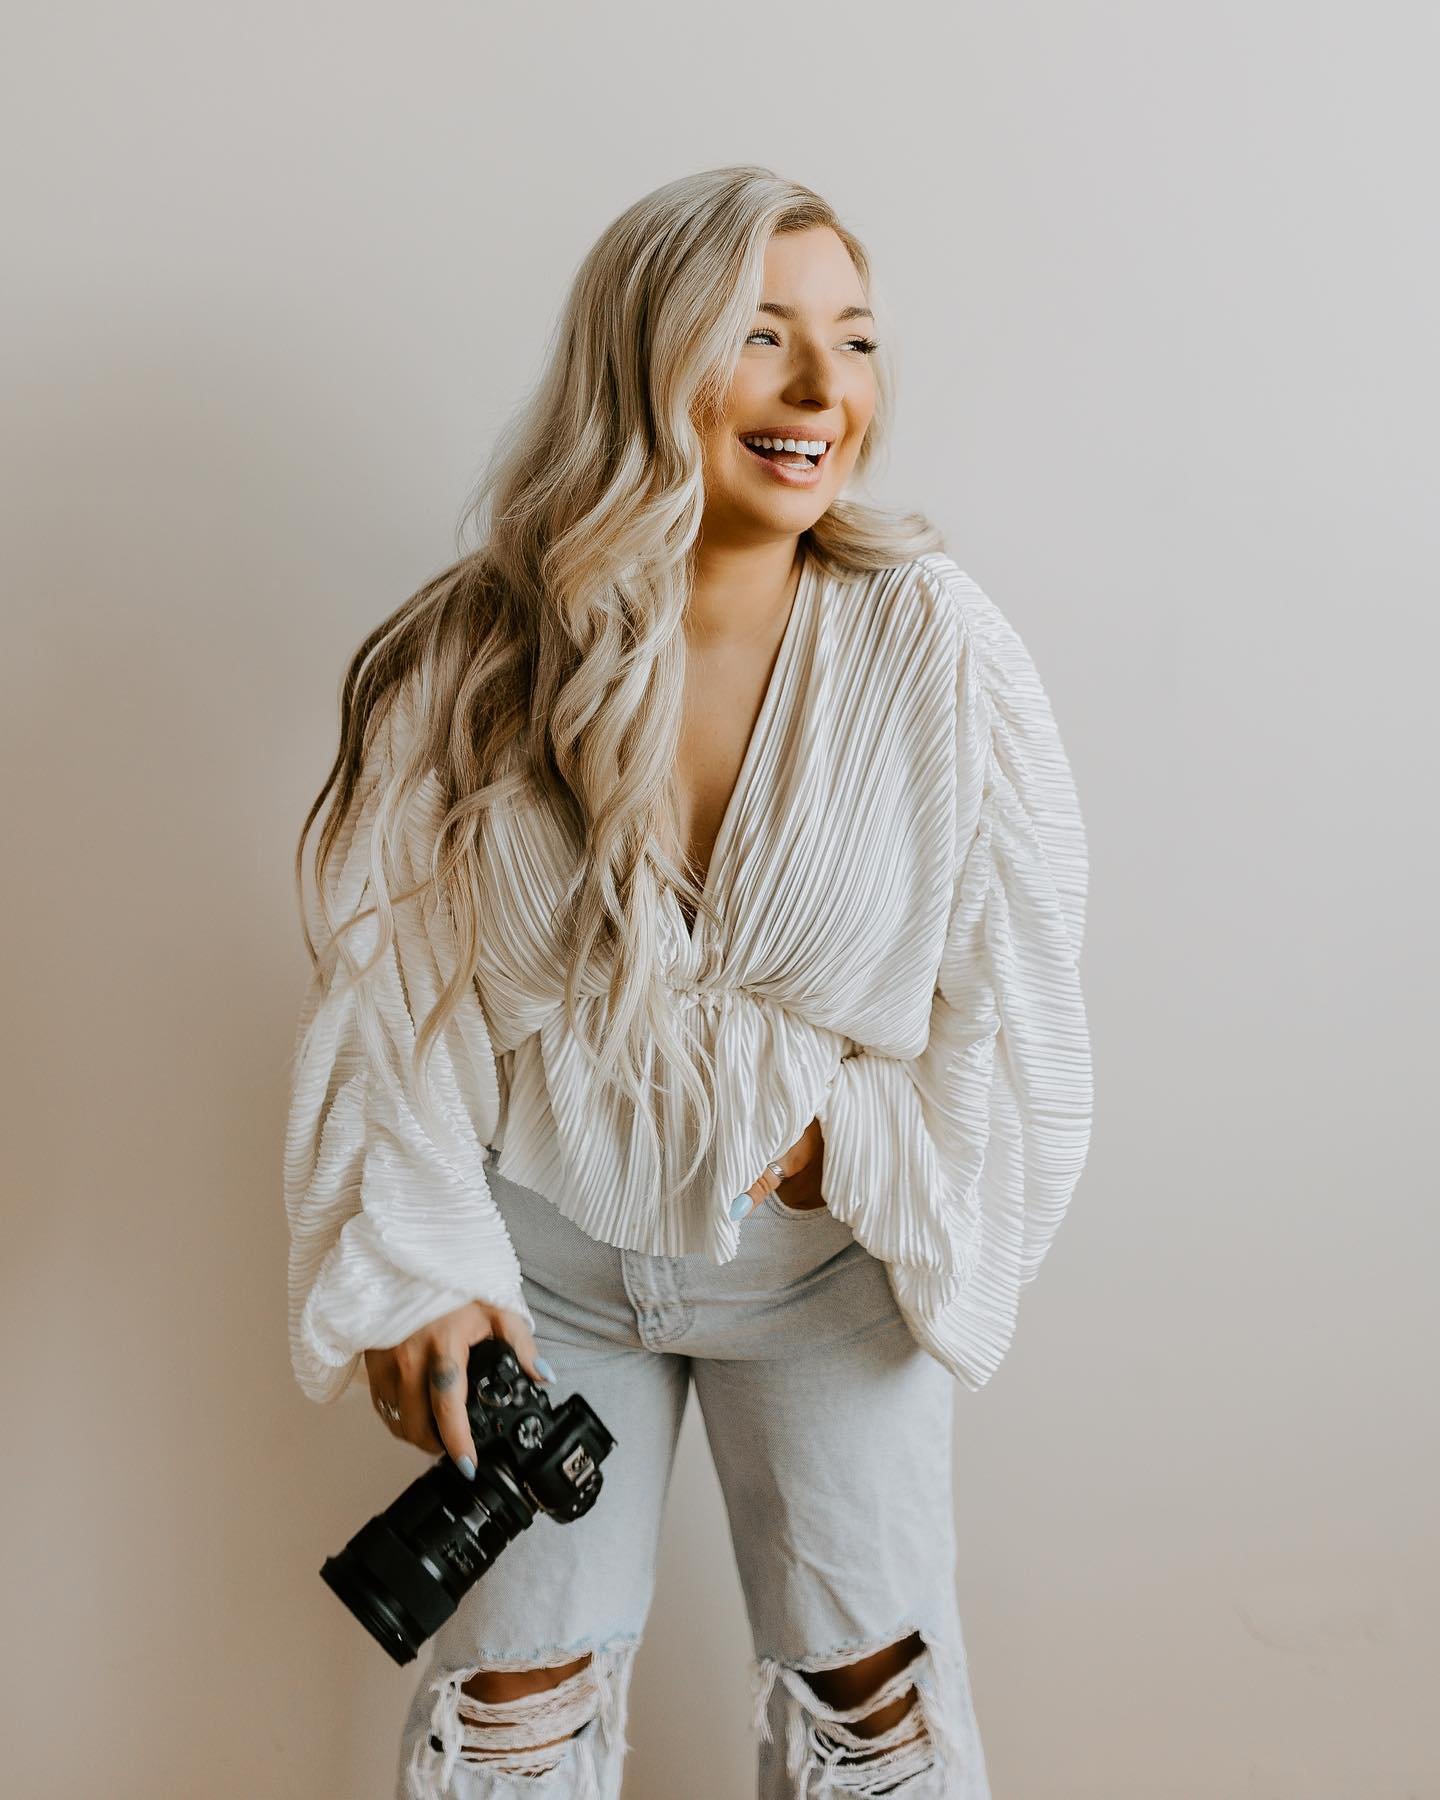 Hey new followers! I&rsquo;m ashlee owner of ap FILM &amp; PHOTO and co-owner of @cedarandfawncollective &hellip; 

I started going steady with photography and videography fresh out of college in 2016 then settled down in 2020, making ap FILM &amp; P